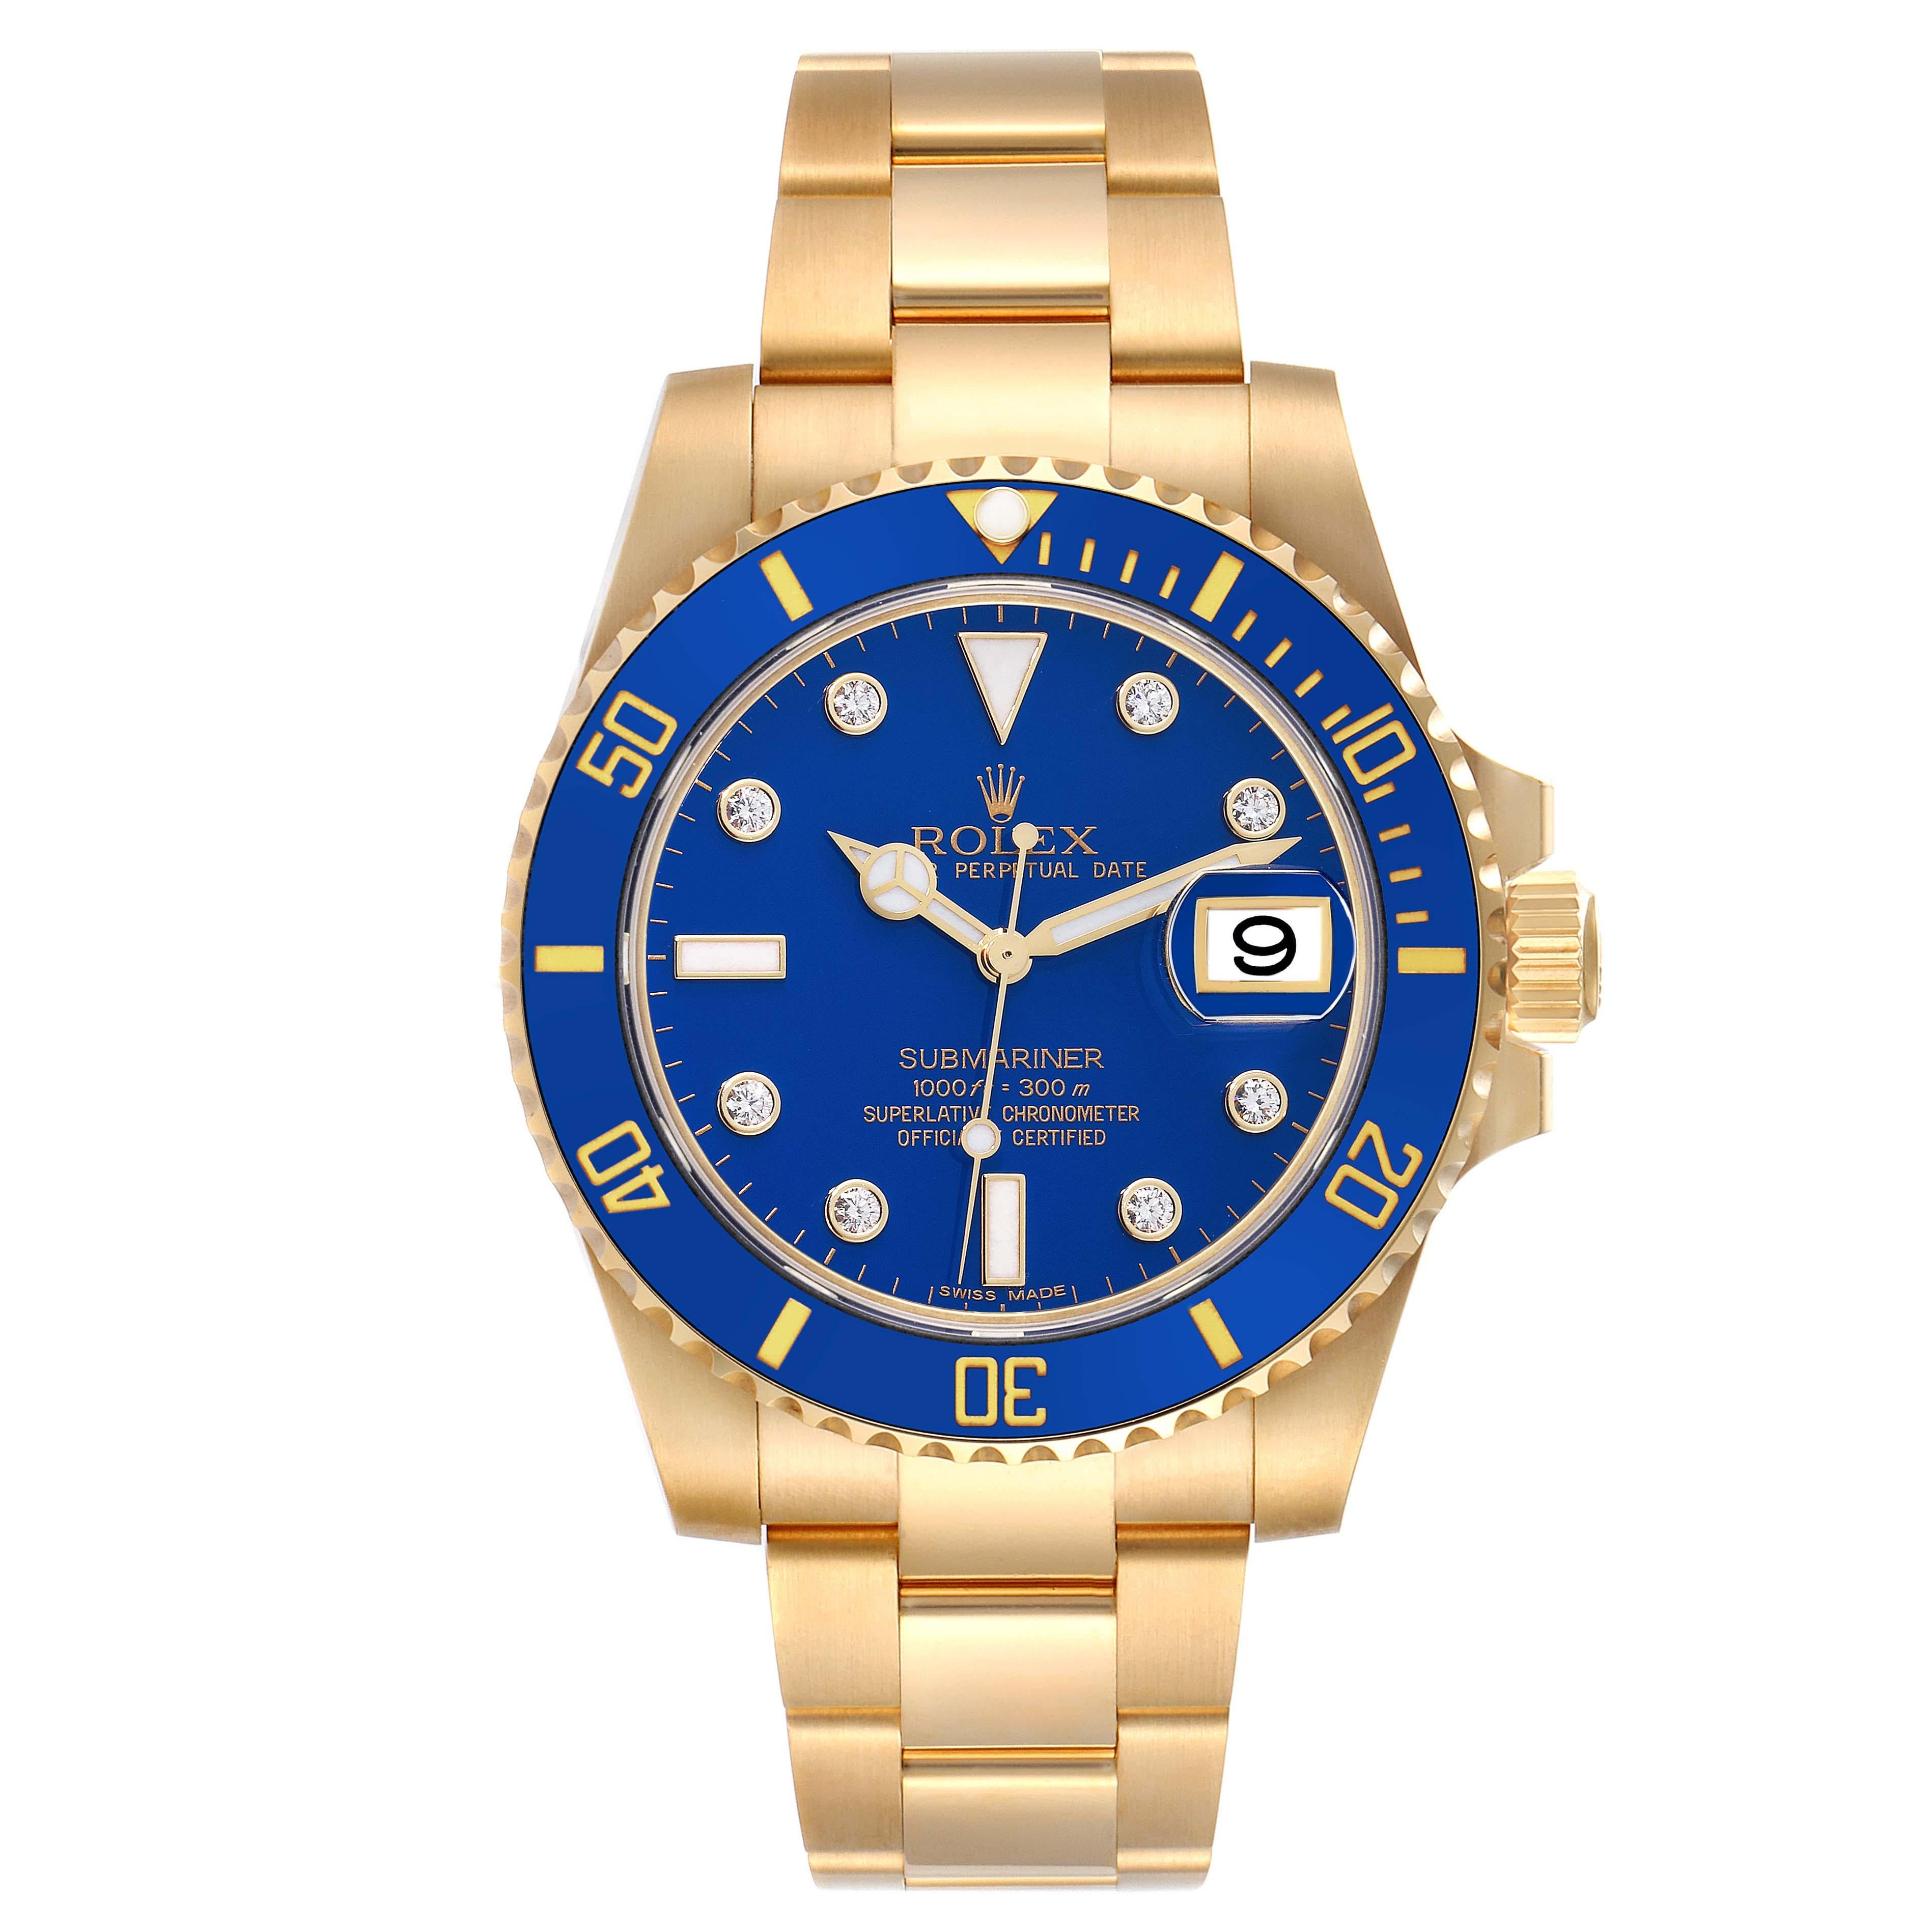 Rolex Submariner Yellow Gold Blue Diamond Dial Mens Watch 116618 Box Card For Sale 1